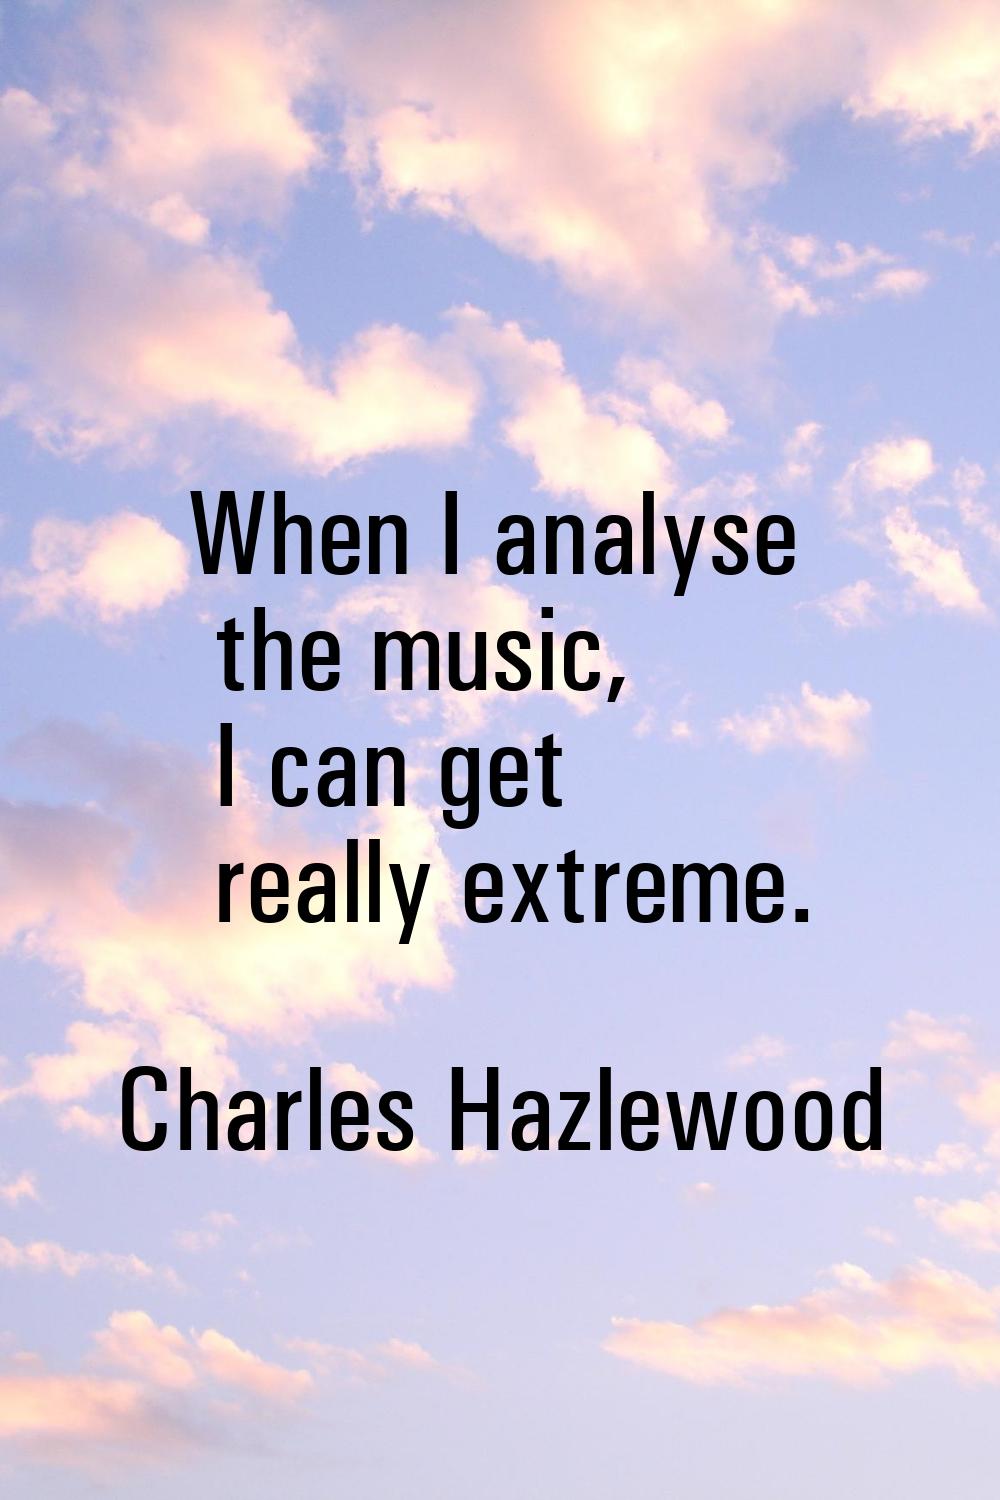 When I analyse the music, I can get really extreme.